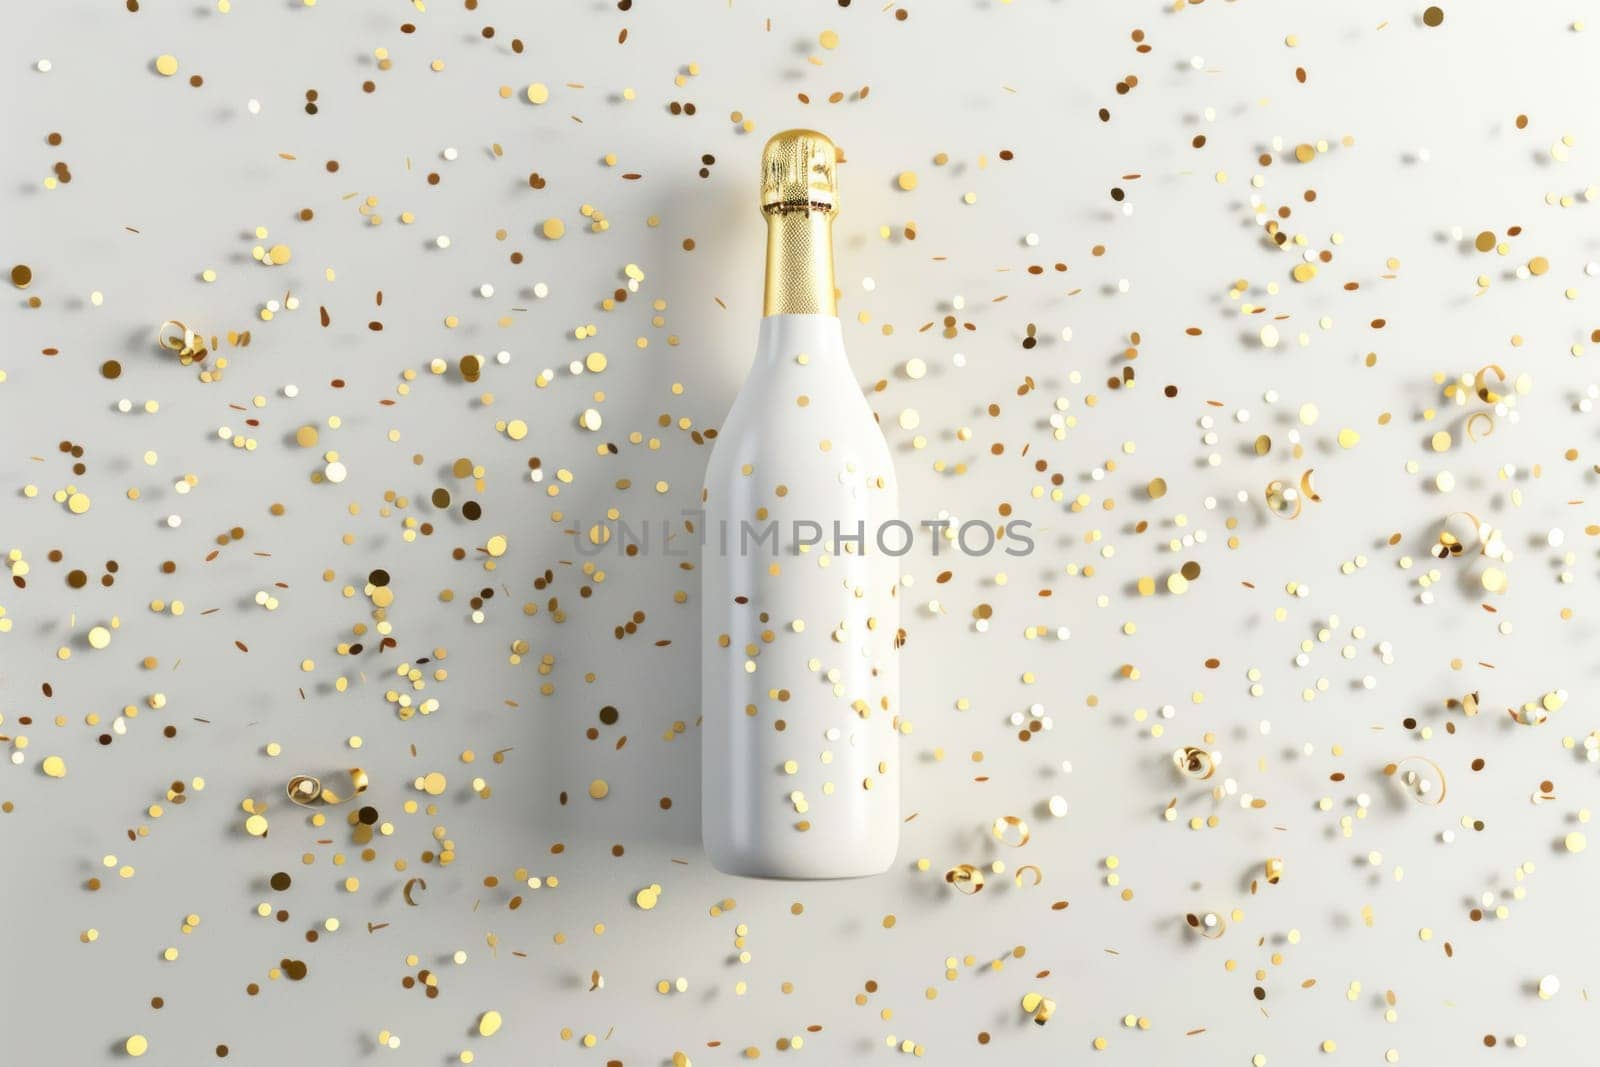 Celebration concept champagne bottle with golden confetti on white background for festive occasions